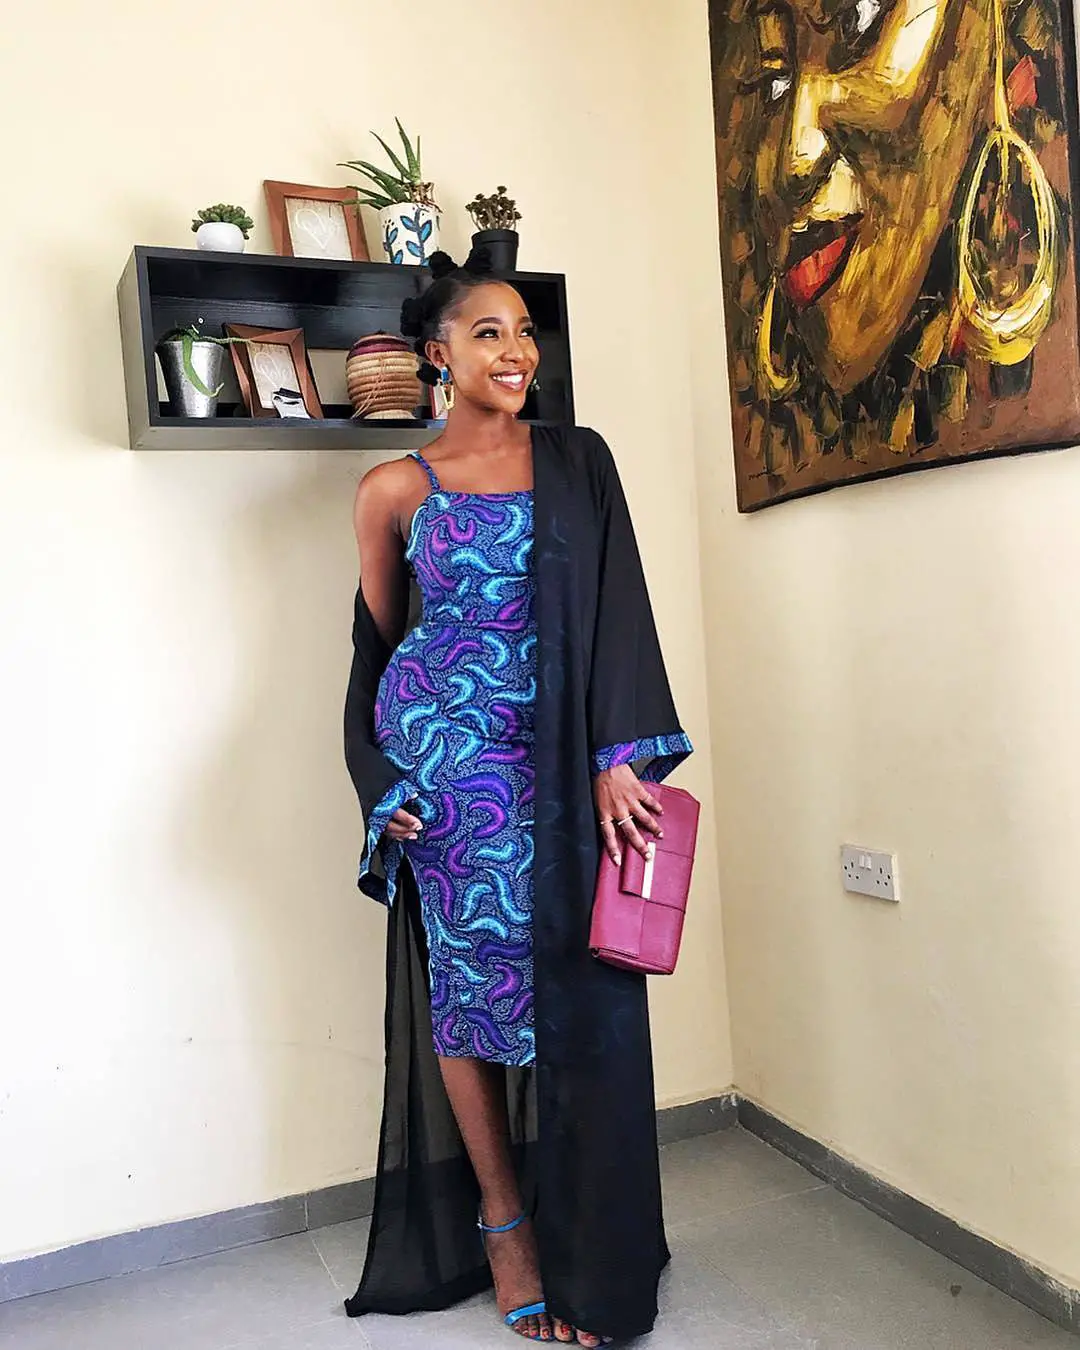 Fabulous And Stunning-The Ankara Styles We Saw Over The Weekend.